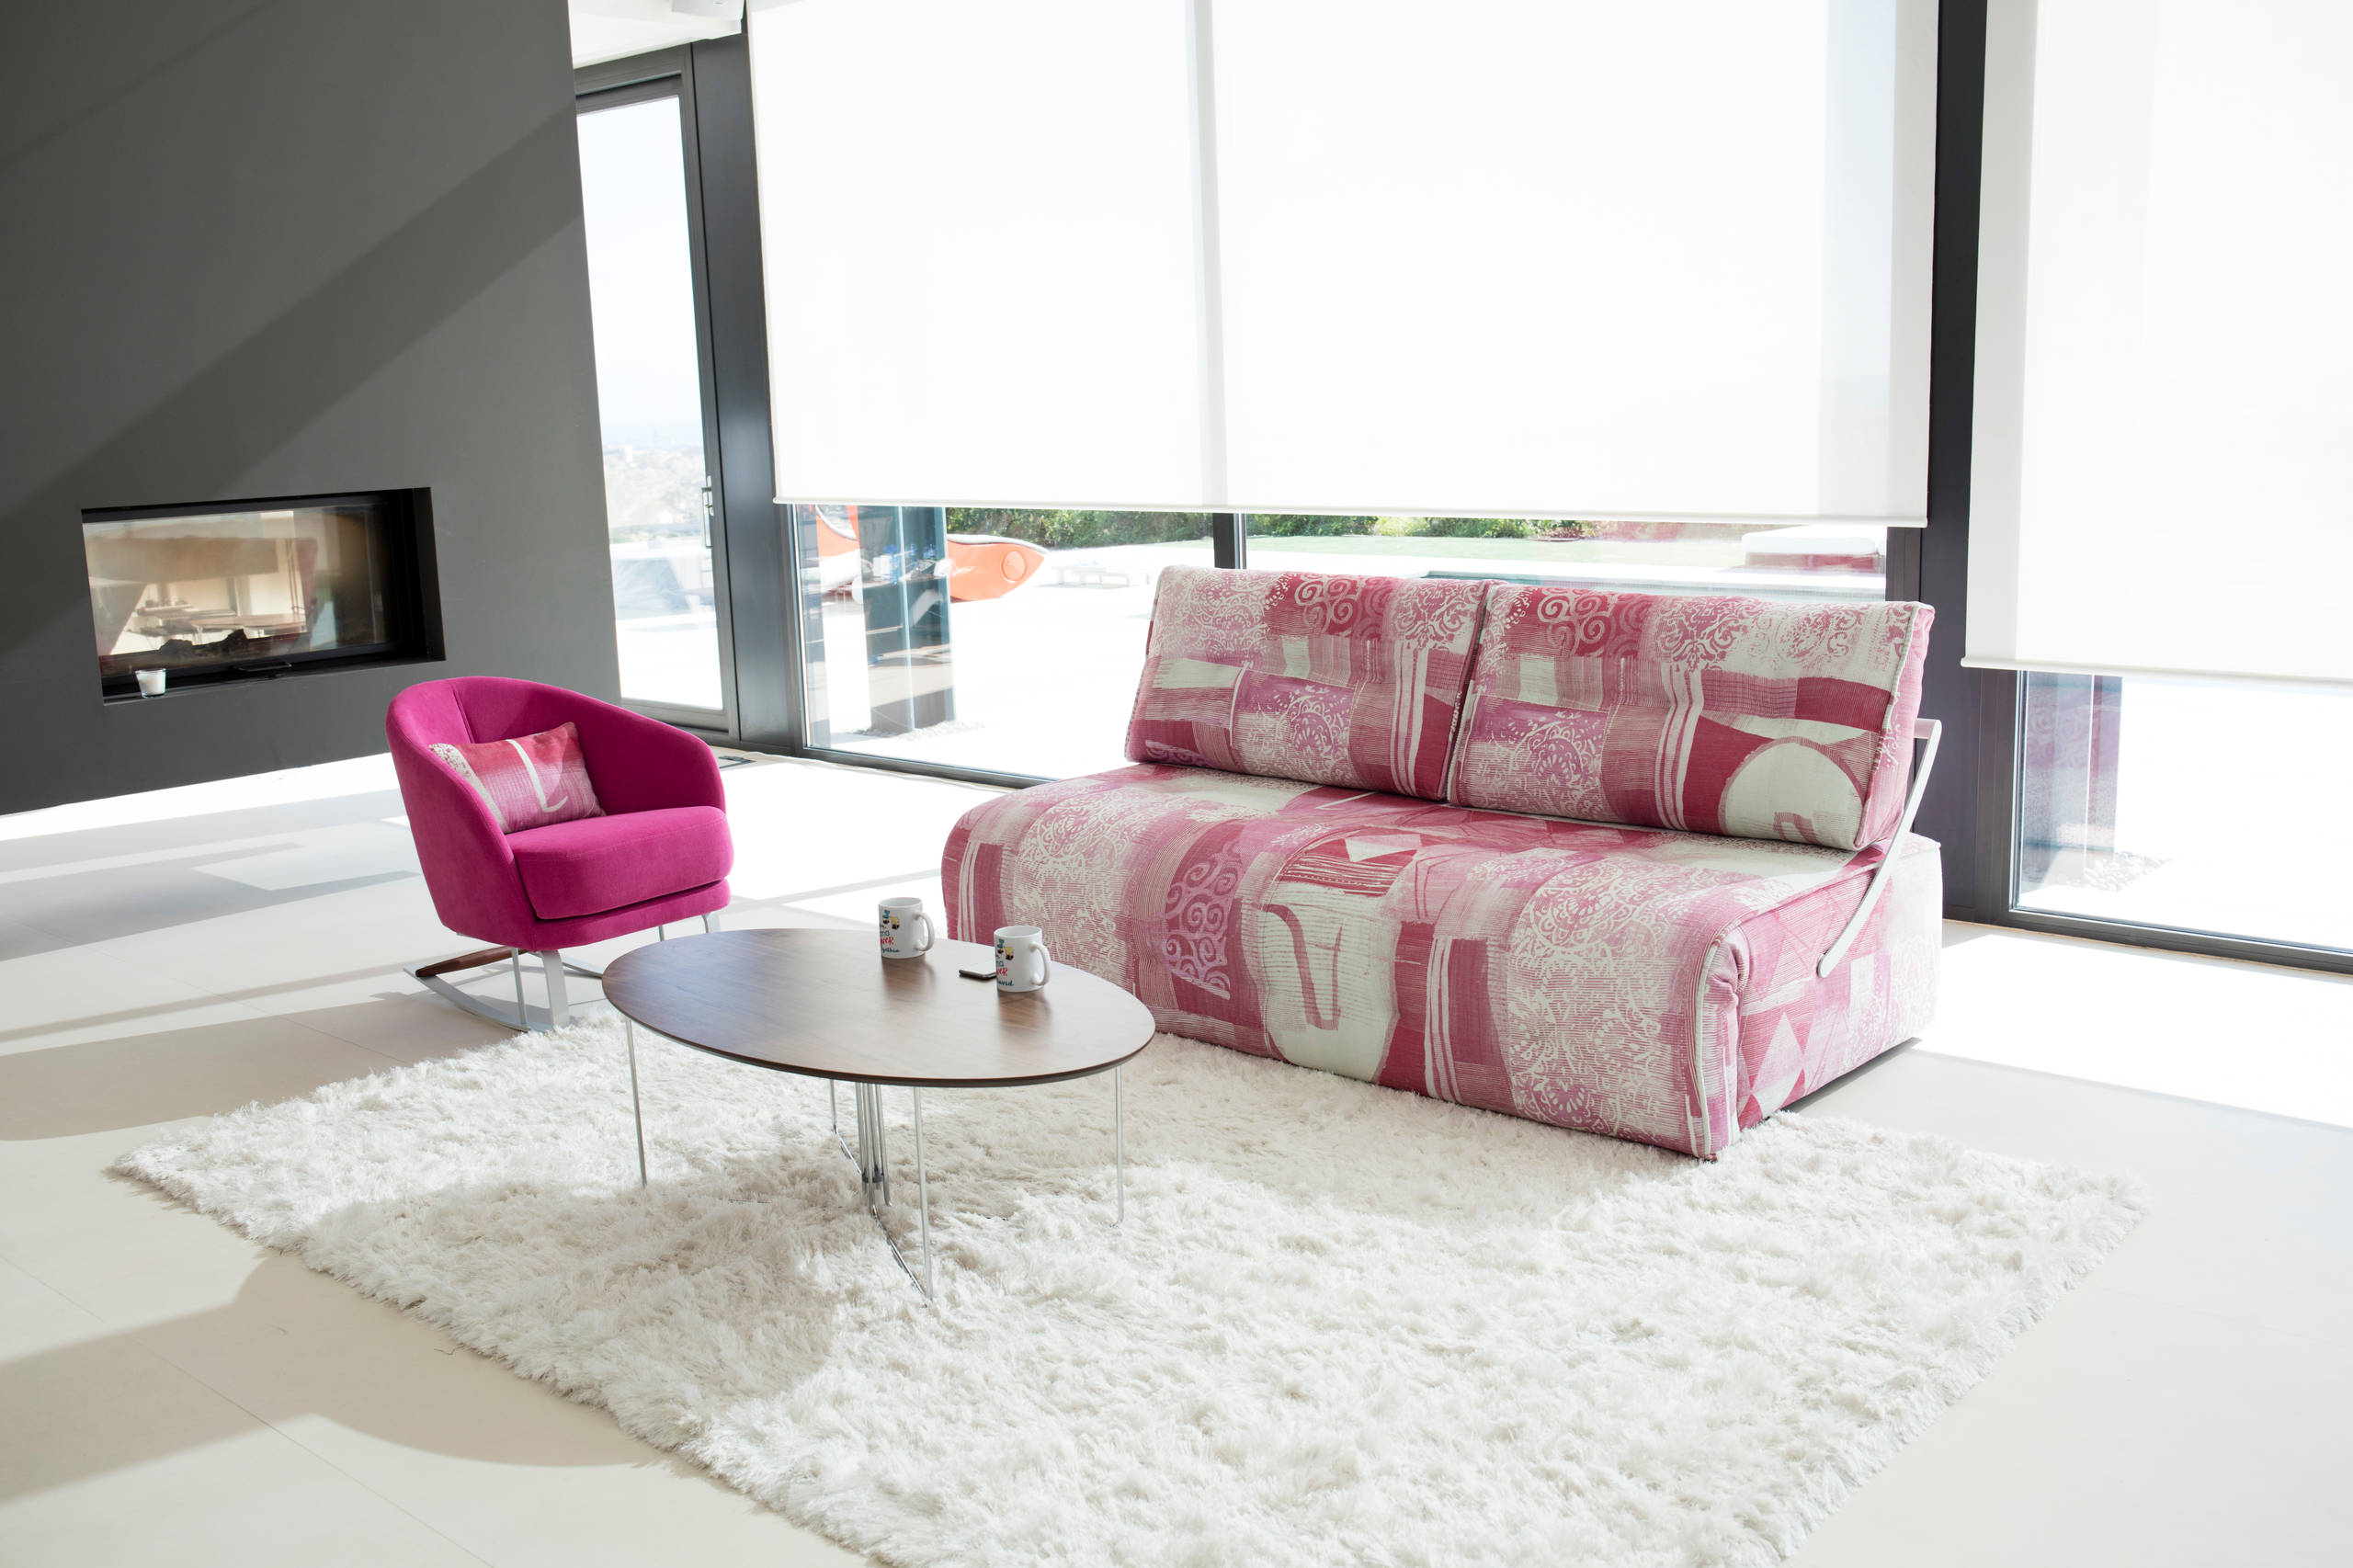 INDY SOFA-BED, FAMA LIVING MONTREAL - Contemporary - Living Room - Montreal  - by Fama Living Montreal | Houzz